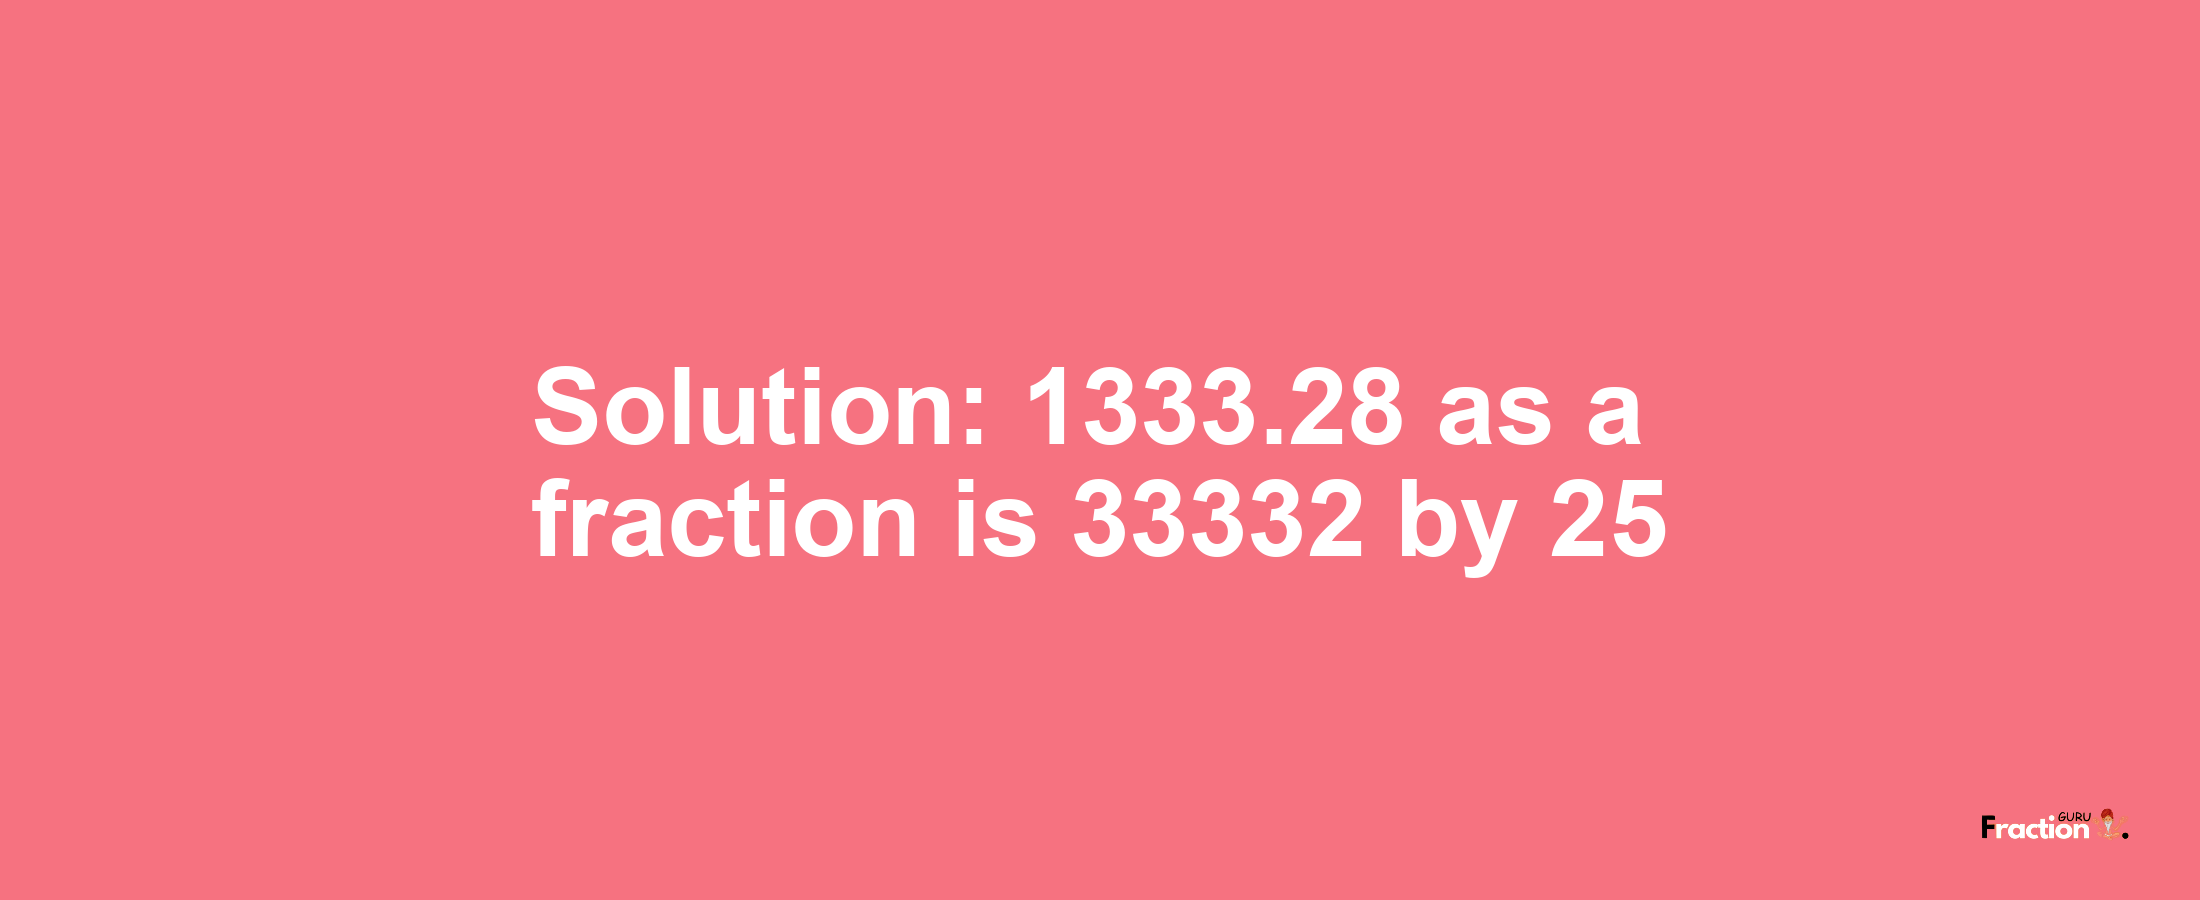 Solution:1333.28 as a fraction is 33332/25